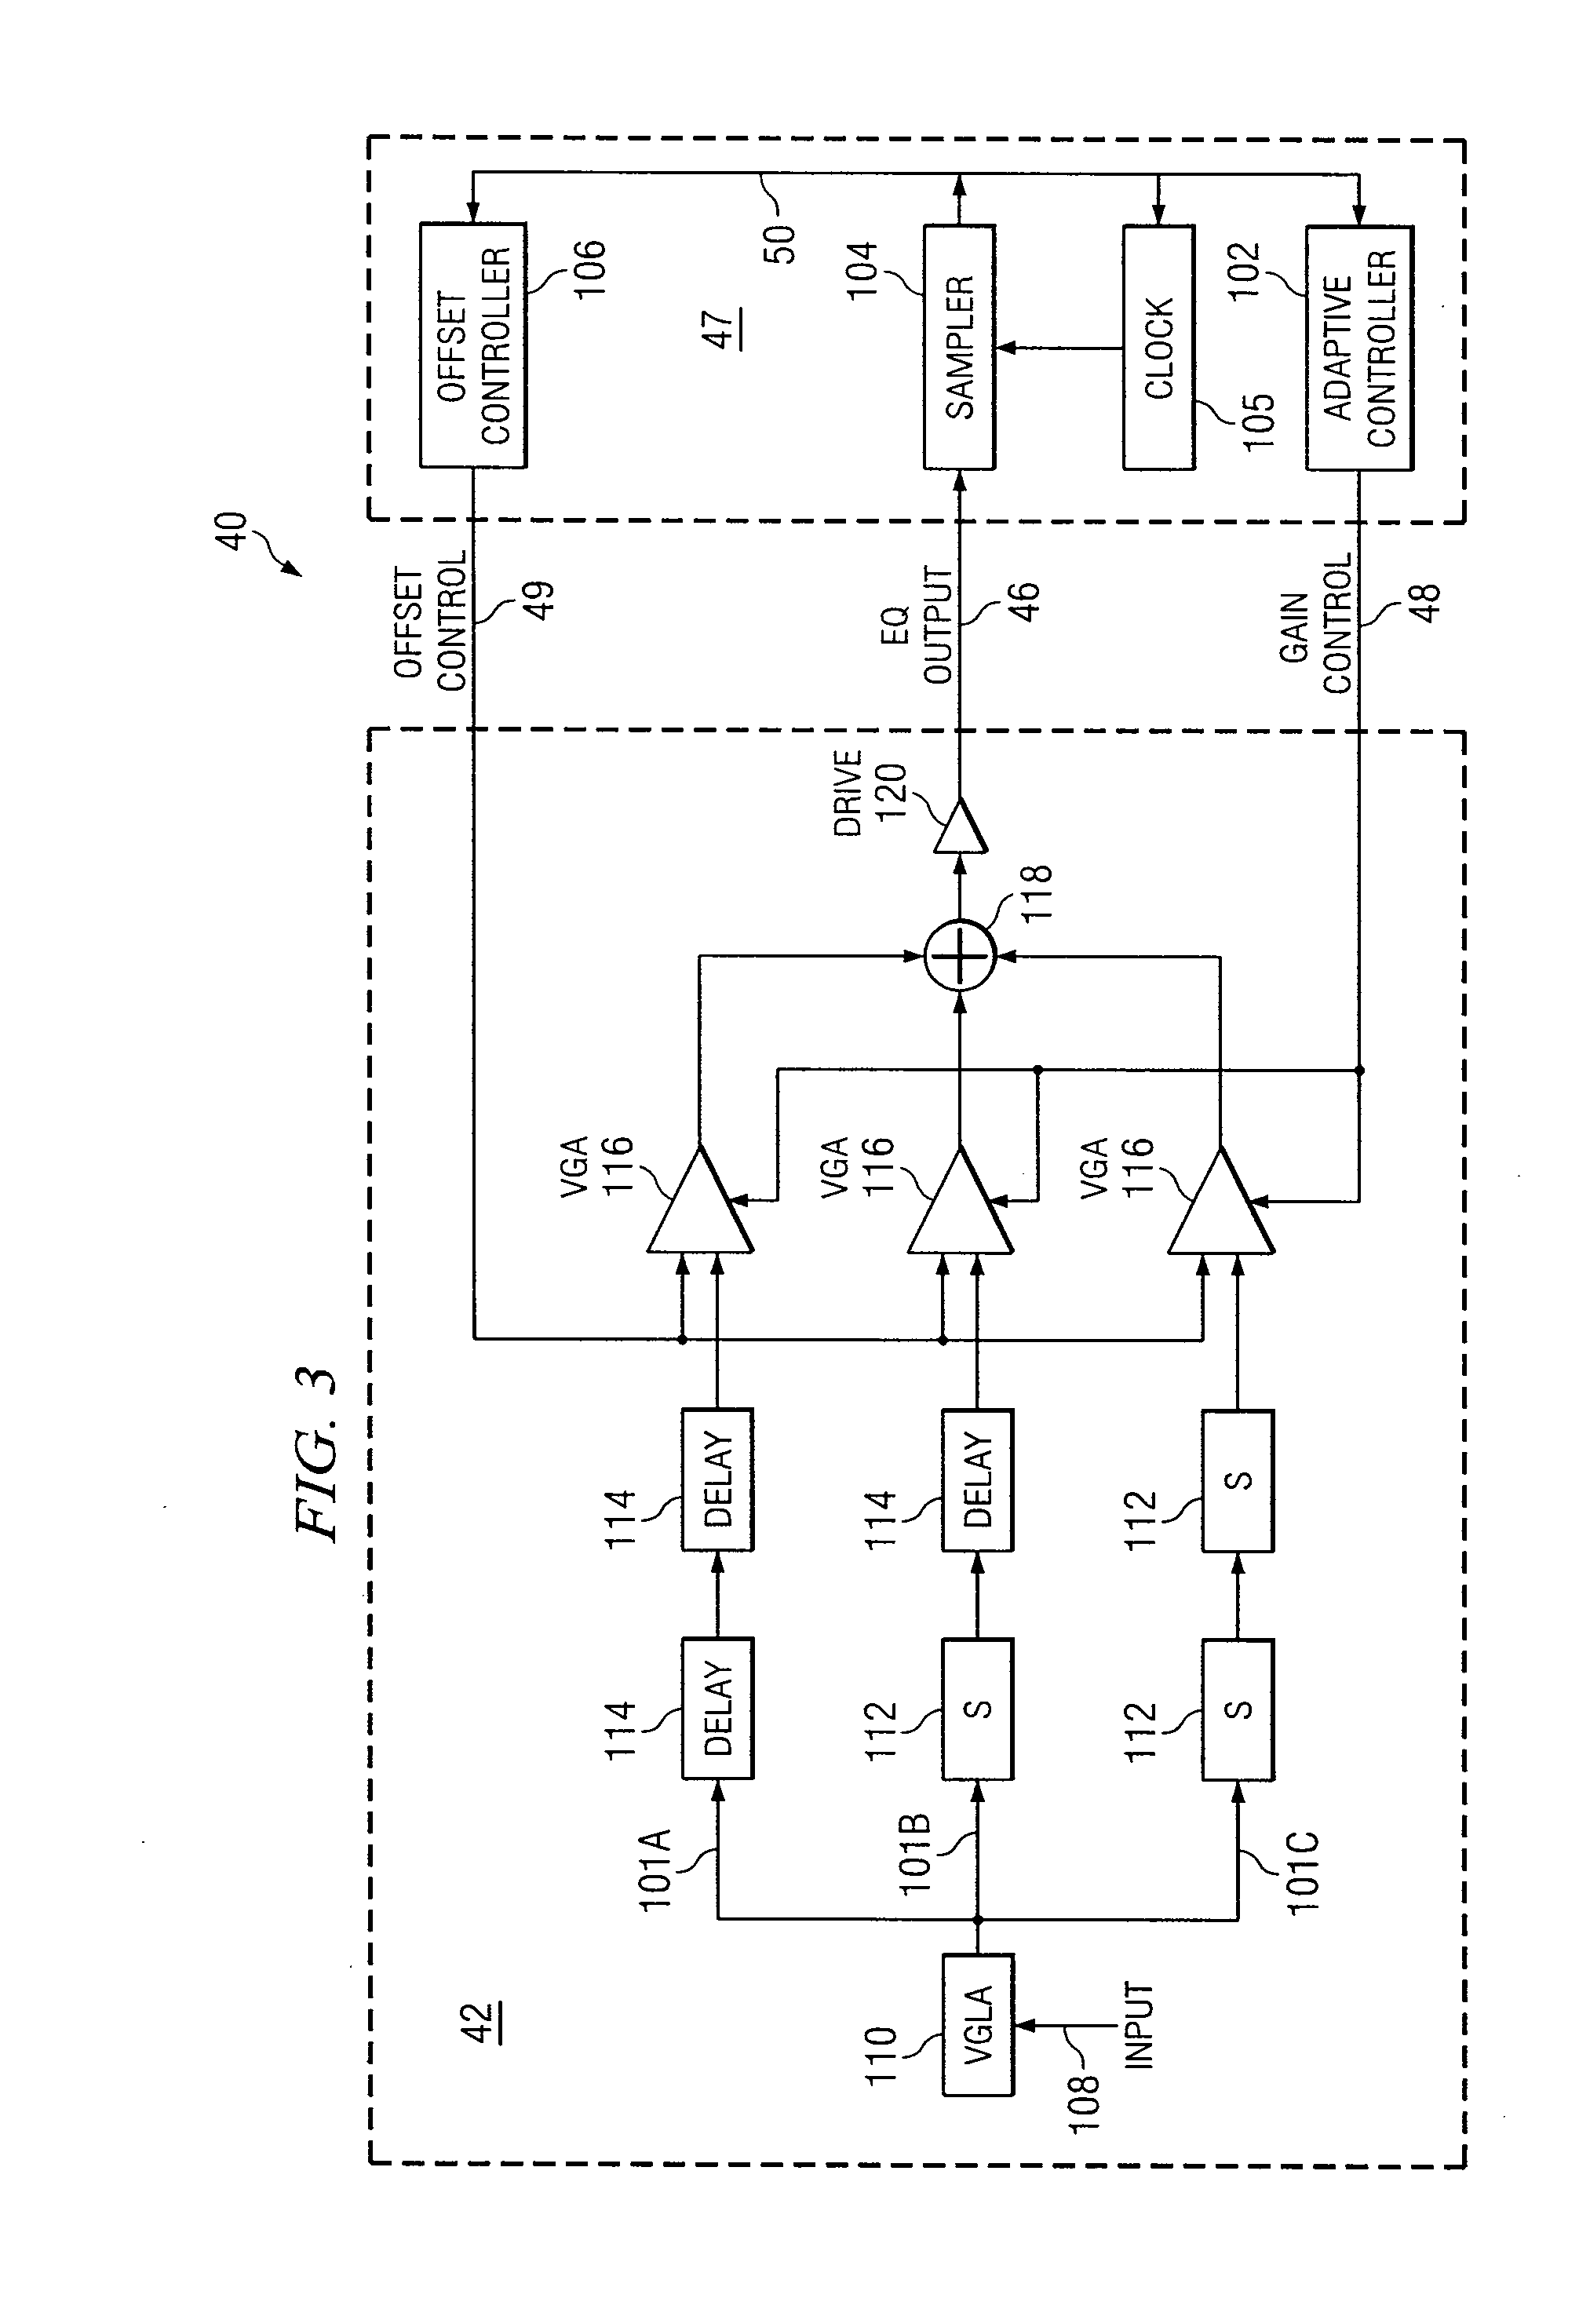 System and Method for Adjusting Compensation Applied to a Signal Using Filter Patterns